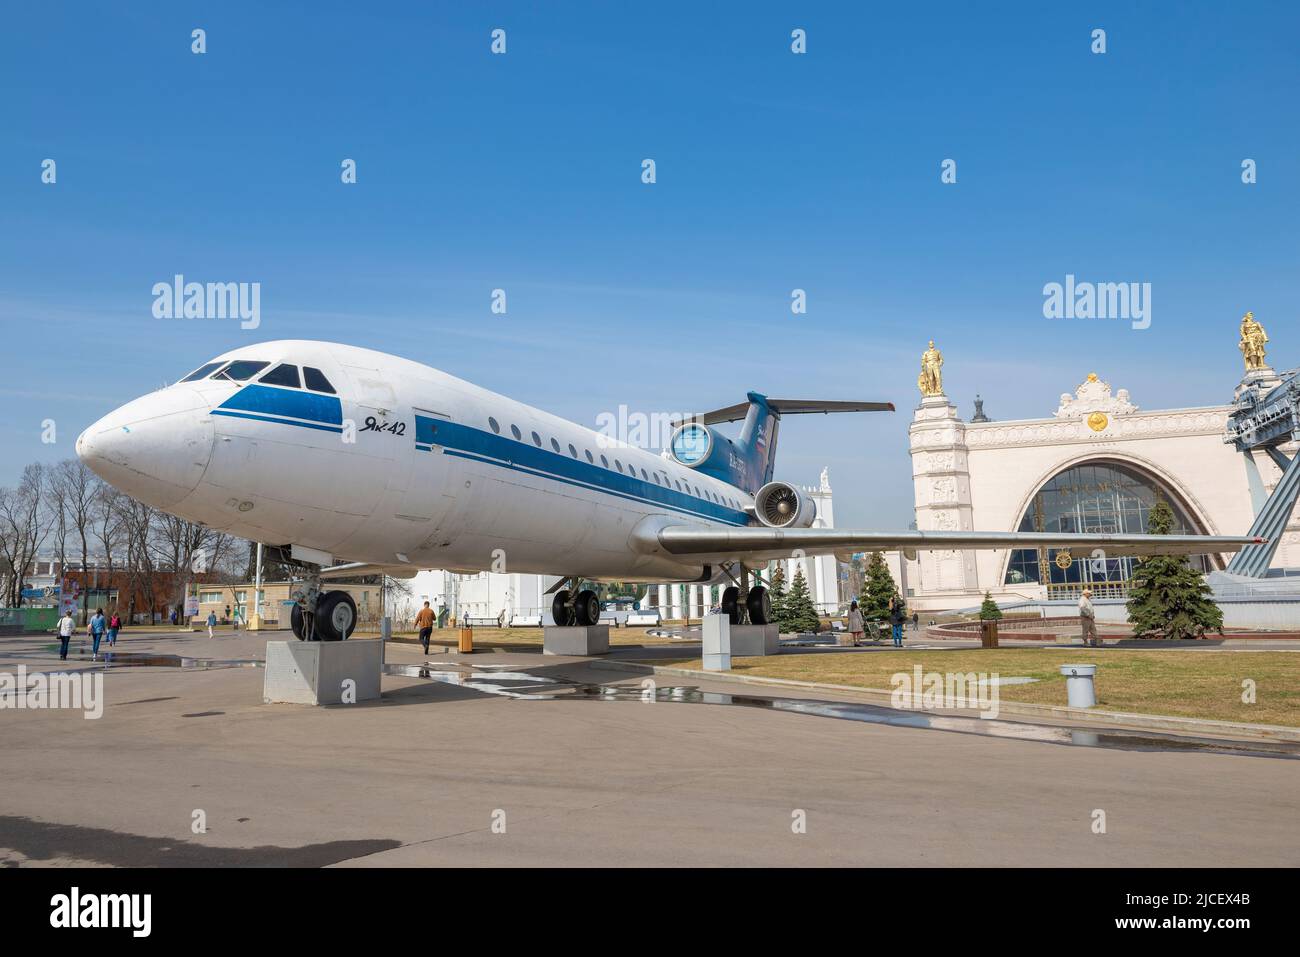 MOSCOW, RUSSIA - APRIL 14, 2021: Soviet passenger plane of Yak-42 on the territory of the All-Russian Exhibition Center (VDNKh) on April afternoon Stock Photo